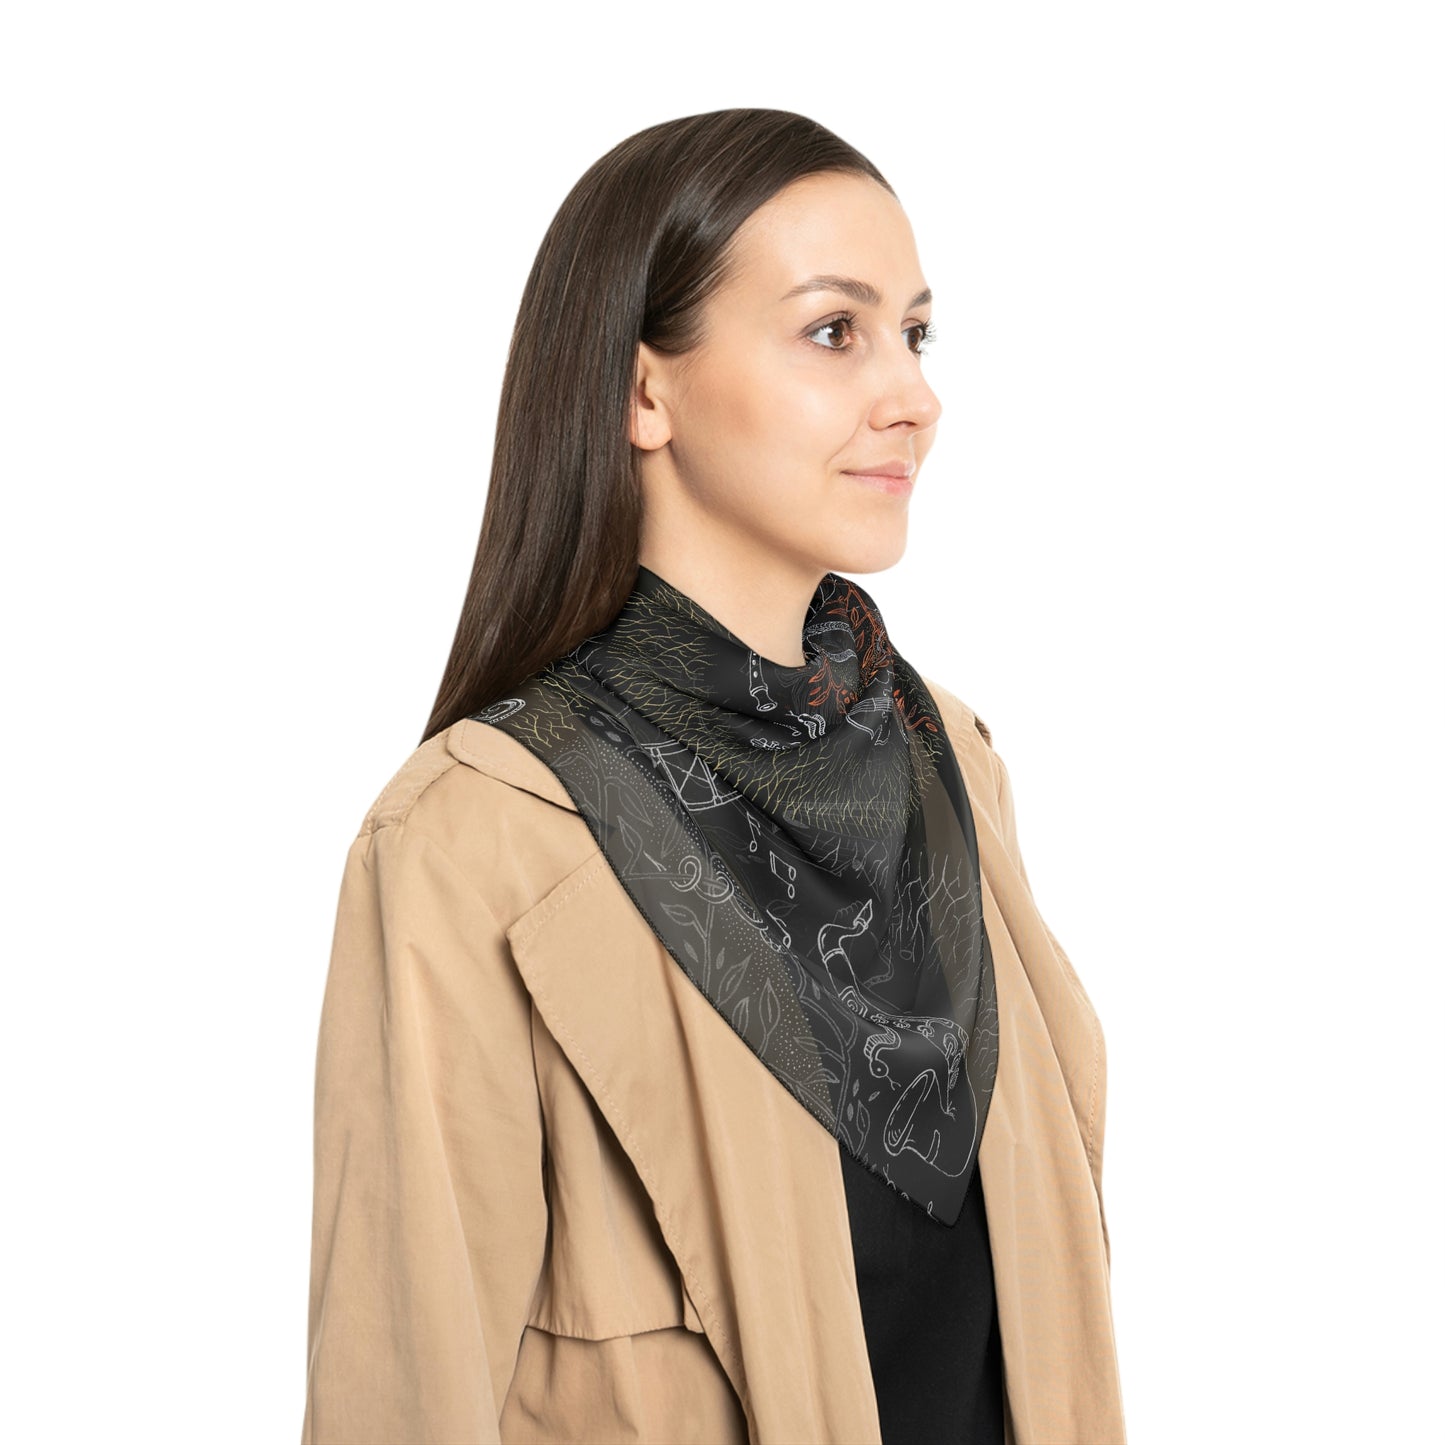 Chinese Years Zodiac Sign Poly Scarf (Ox)